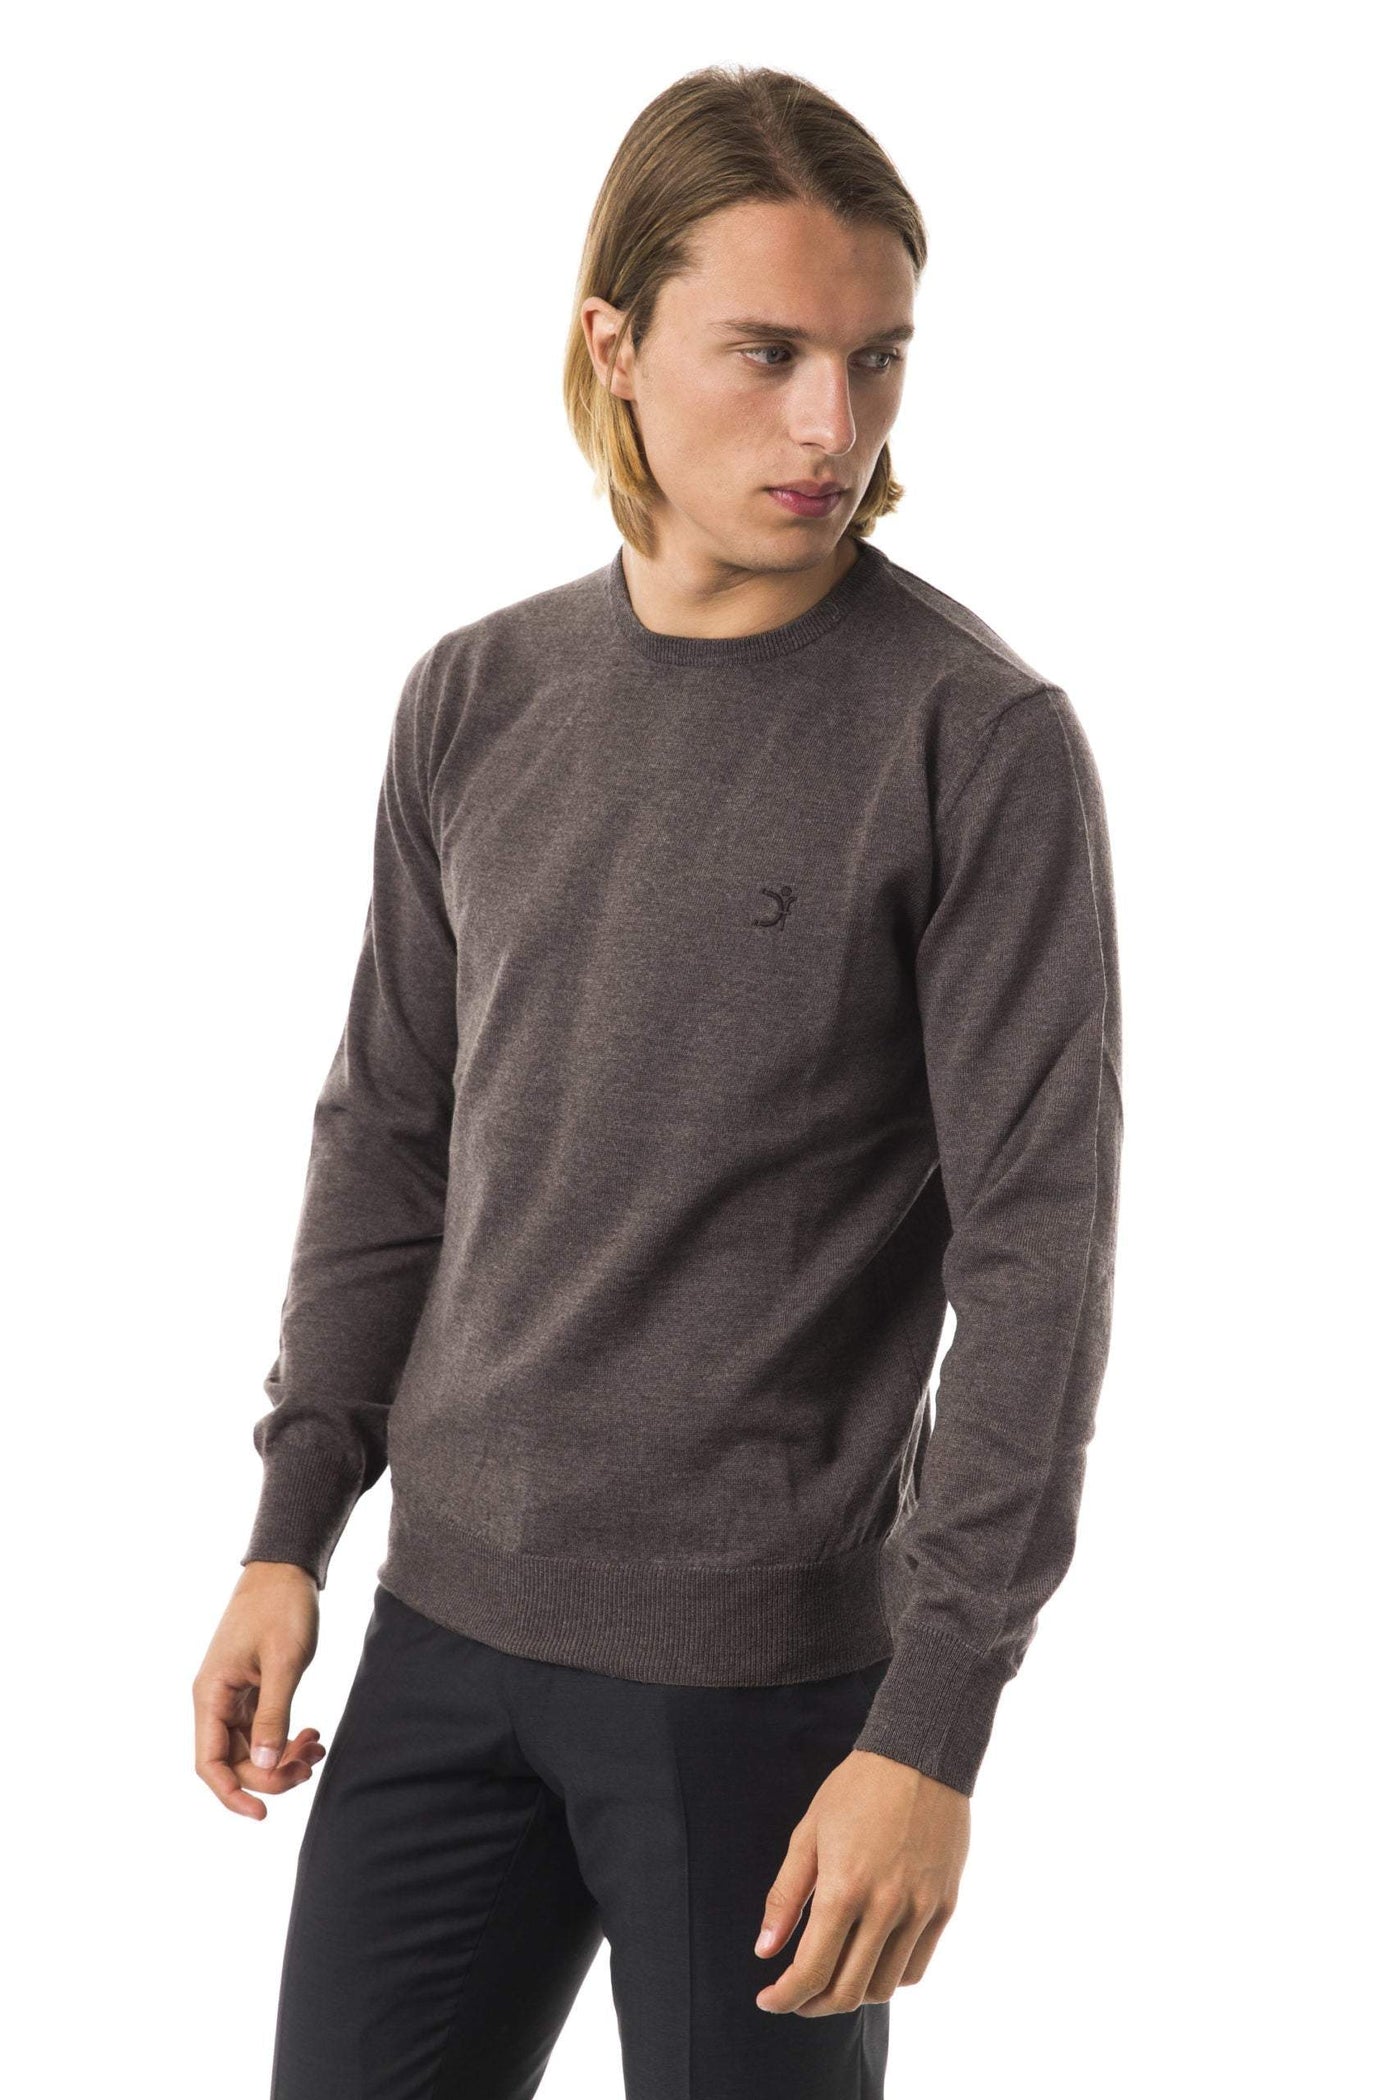 Uominitaliani emboidered  crew neck Sweater #men, feed-color-Gray, feed-gender-adult, feed-gender-male, Gray, L, Sweaters - Men - Clothing, Uominitaliani, XL, XXL at SEYMAYKA